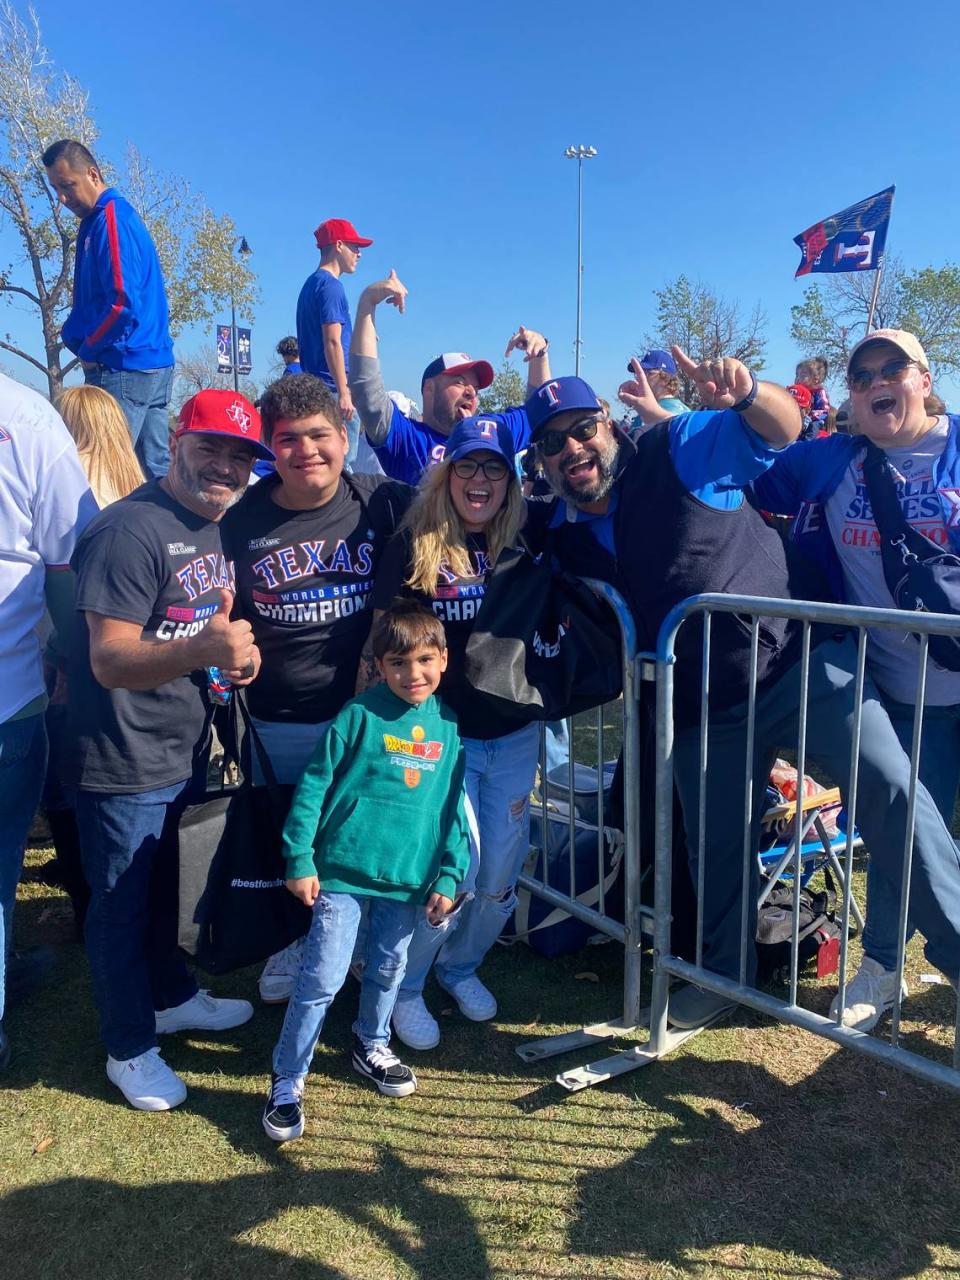 Life-long Rangers fan Kamal Heikal, second from the right, poses with fellow fans.